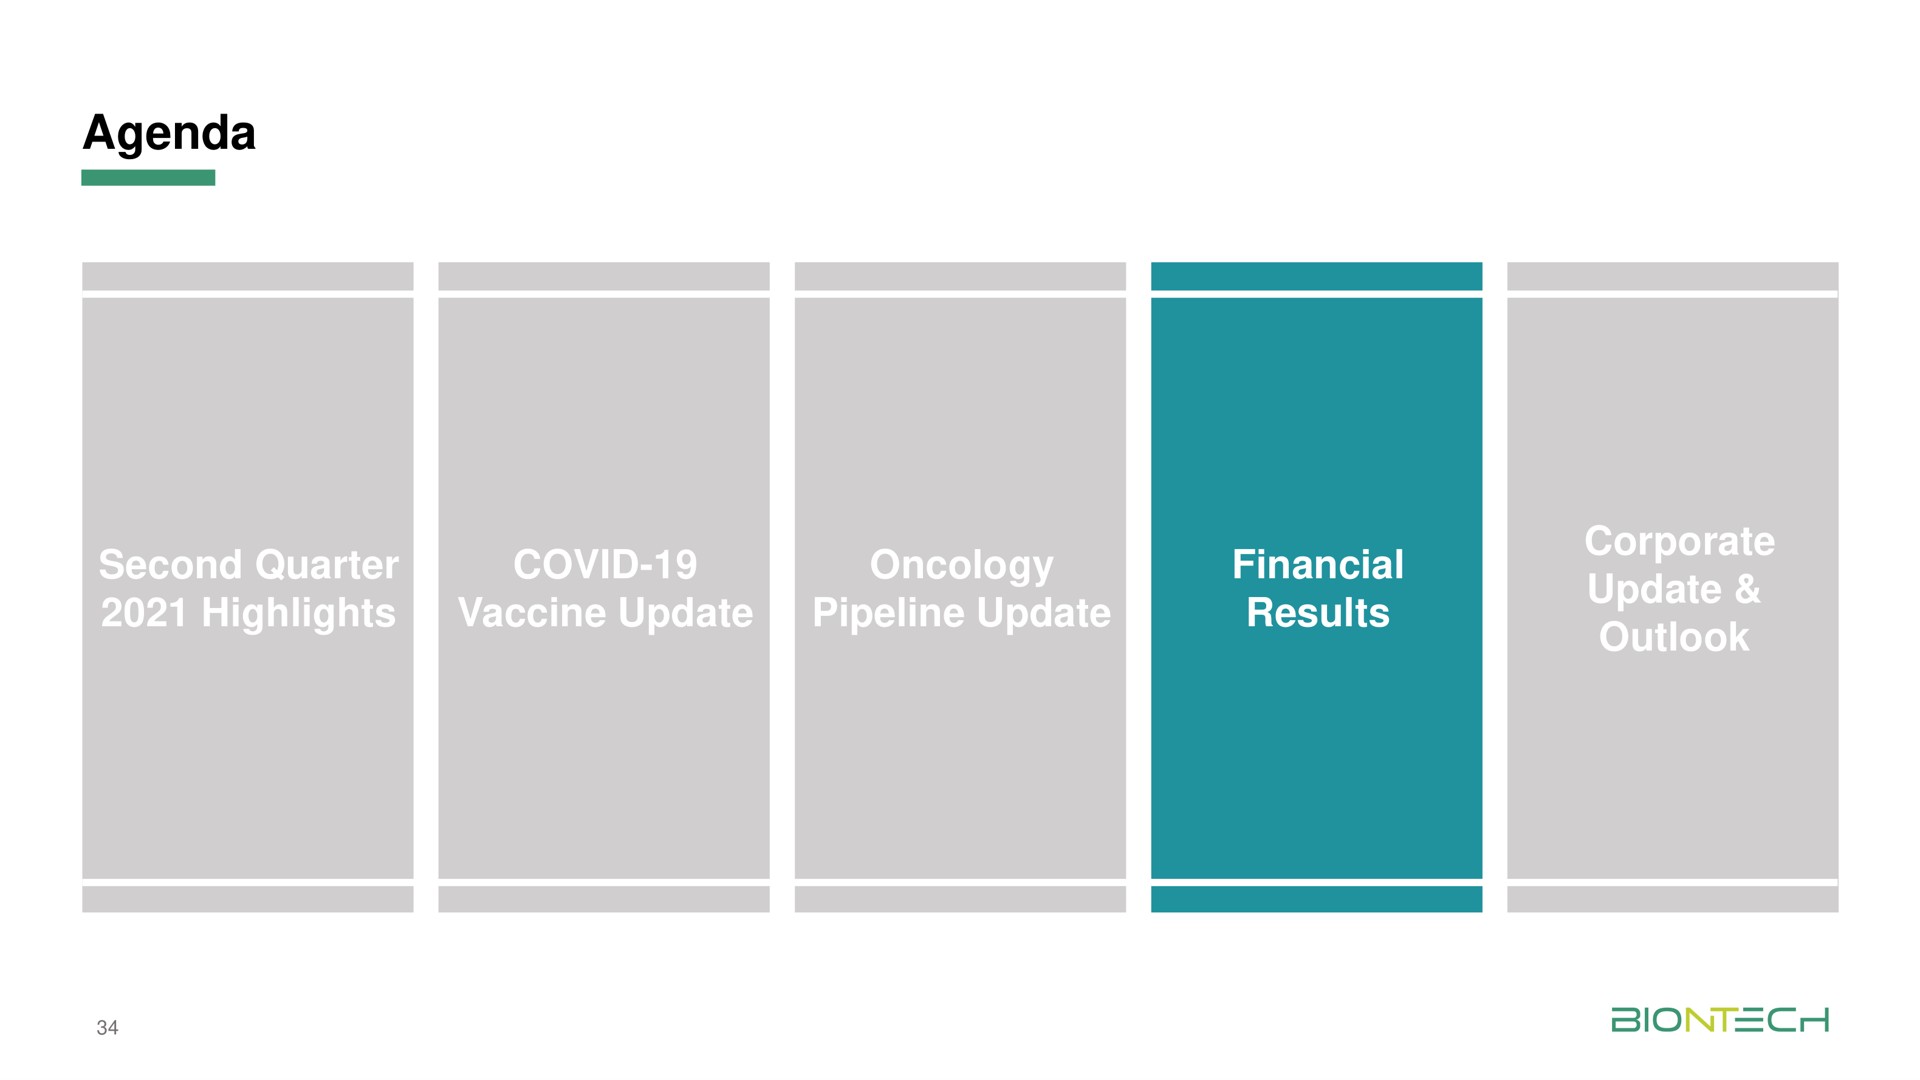 agenda second quarter highlights covid vaccine update oncology pipeline update financial results corporate update outlook | BioNTech